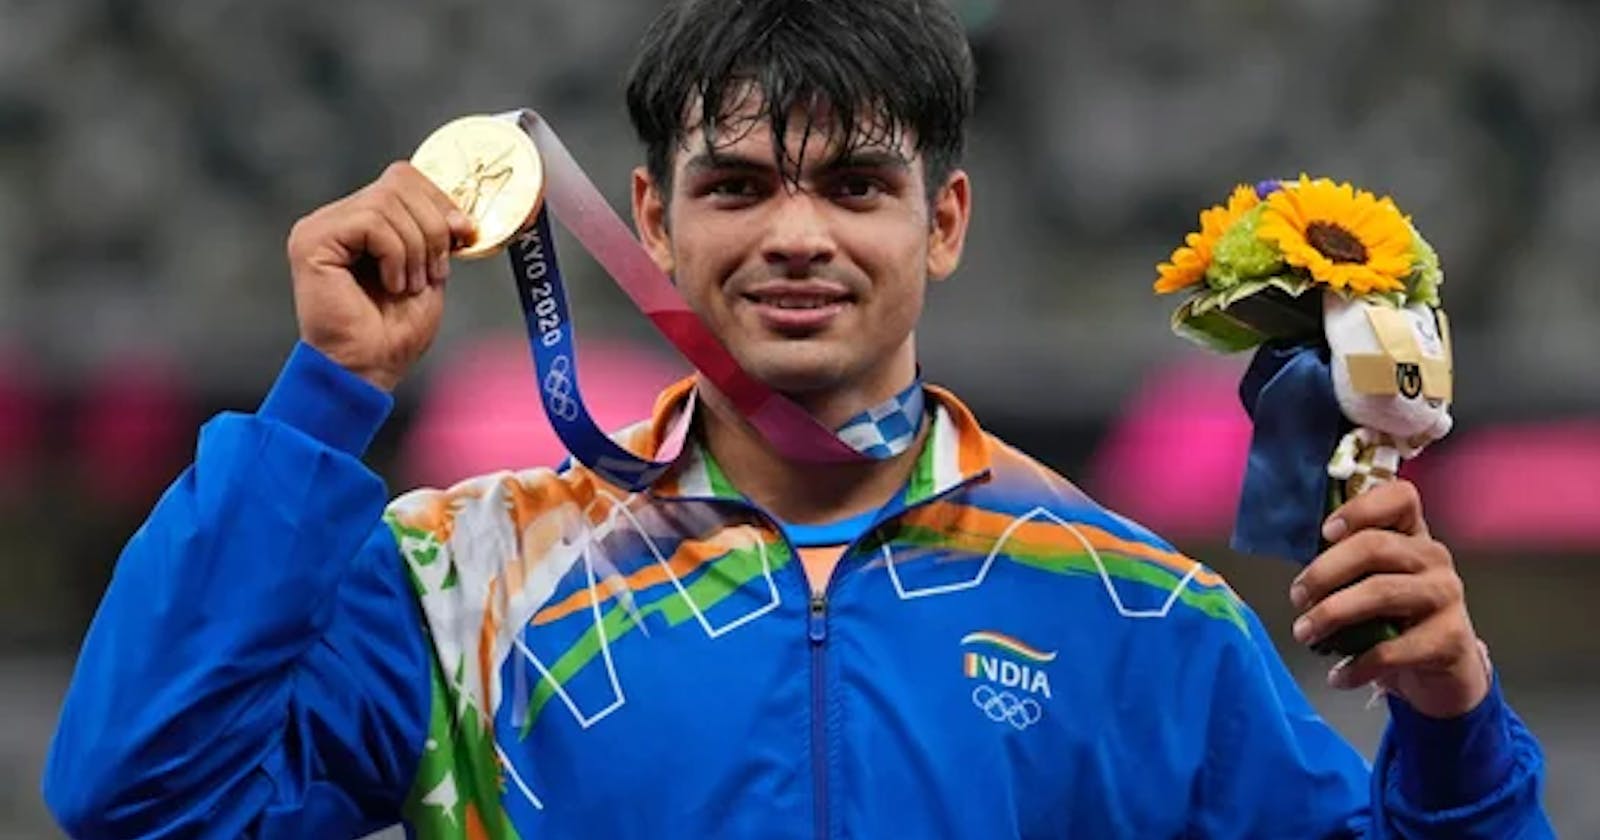 The Golden boy and what this means for Indian Sports